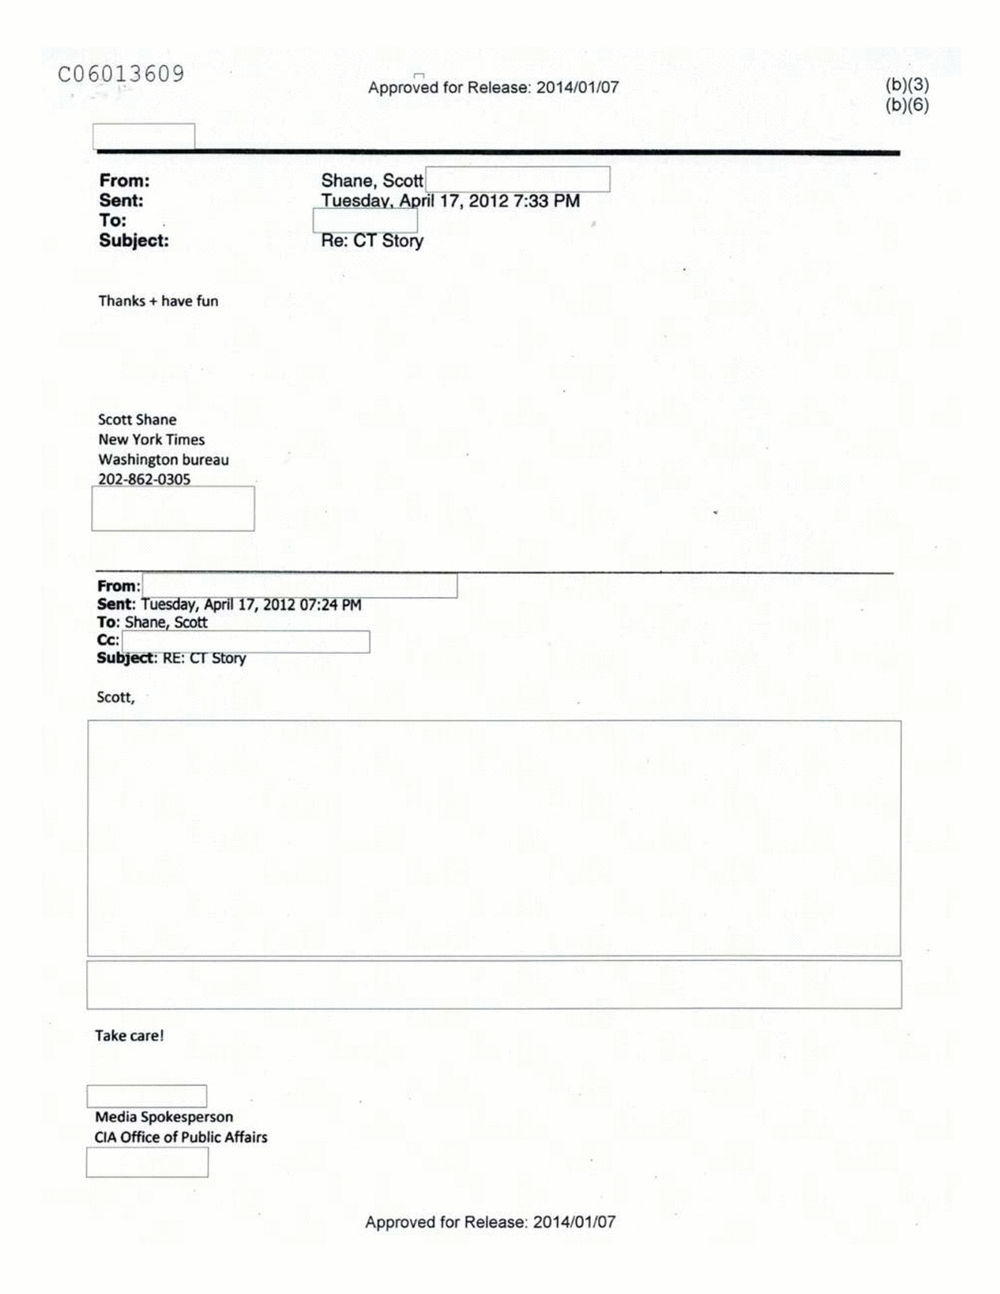 Page 423 from Email Correspondence Between Reporters and CIA Flacks